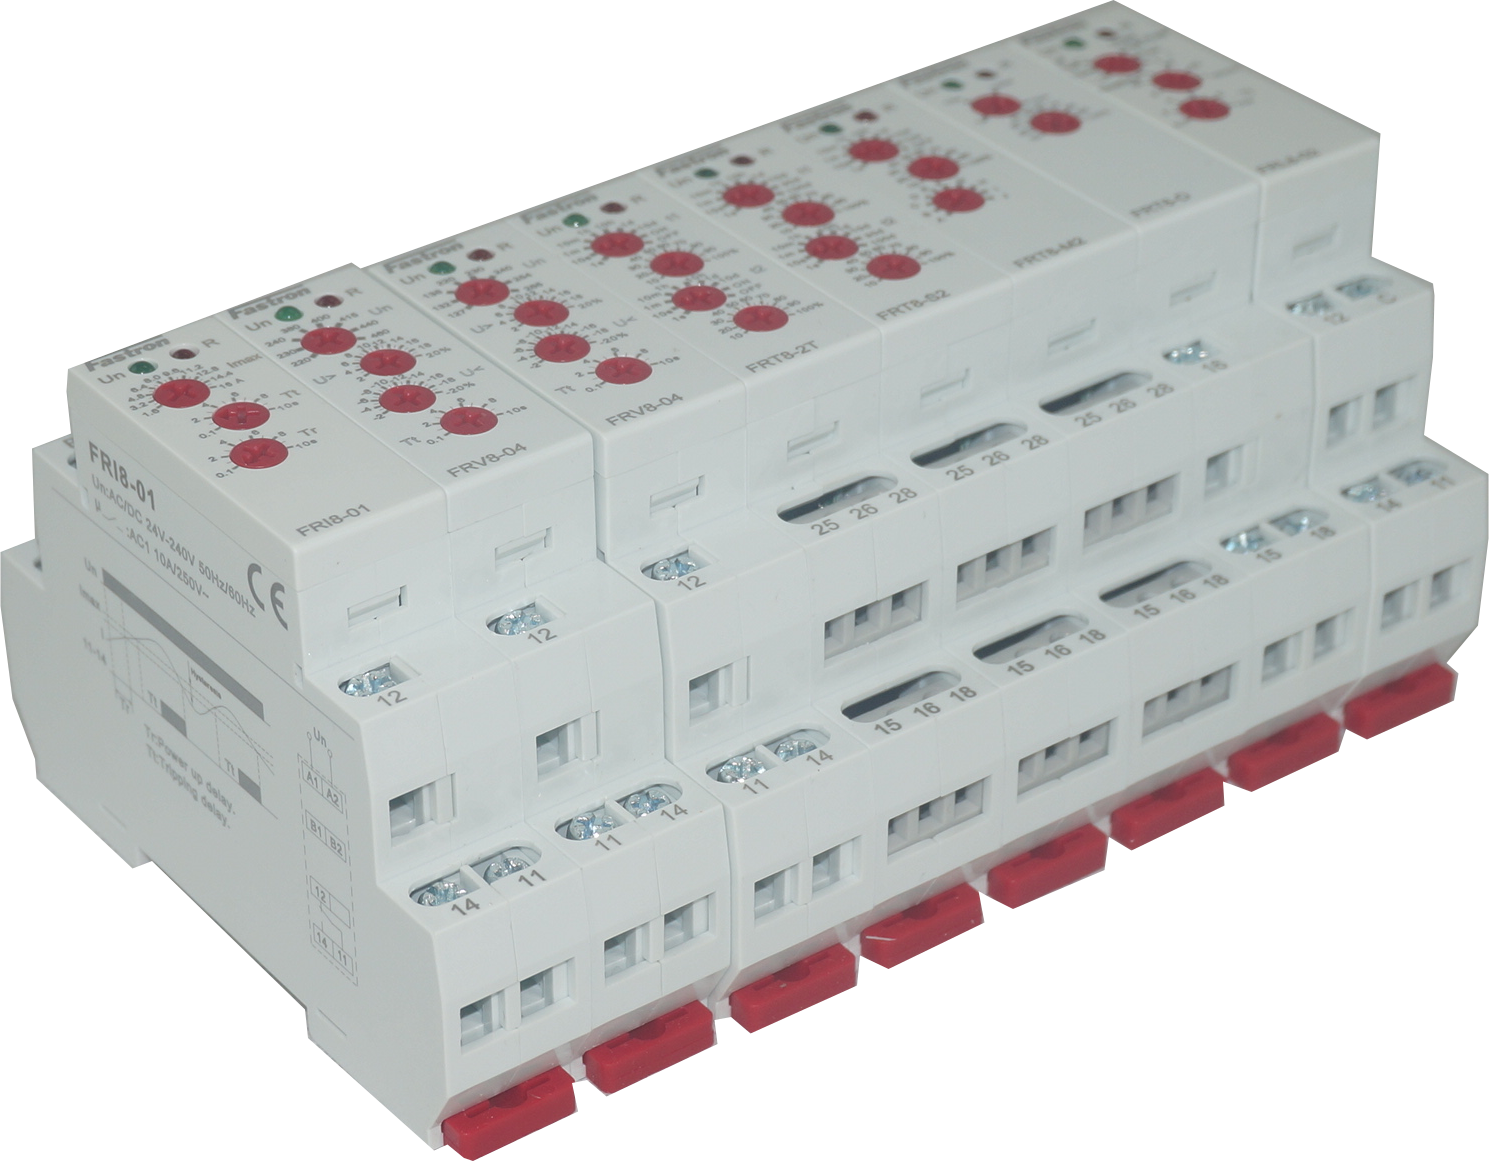 FRW8-02, Temperature Range Control Relay, High/Low Limit Setting, 24 - 240VAC/DC, Din Rail Mount, 1 x SPST 16 Amp Relay